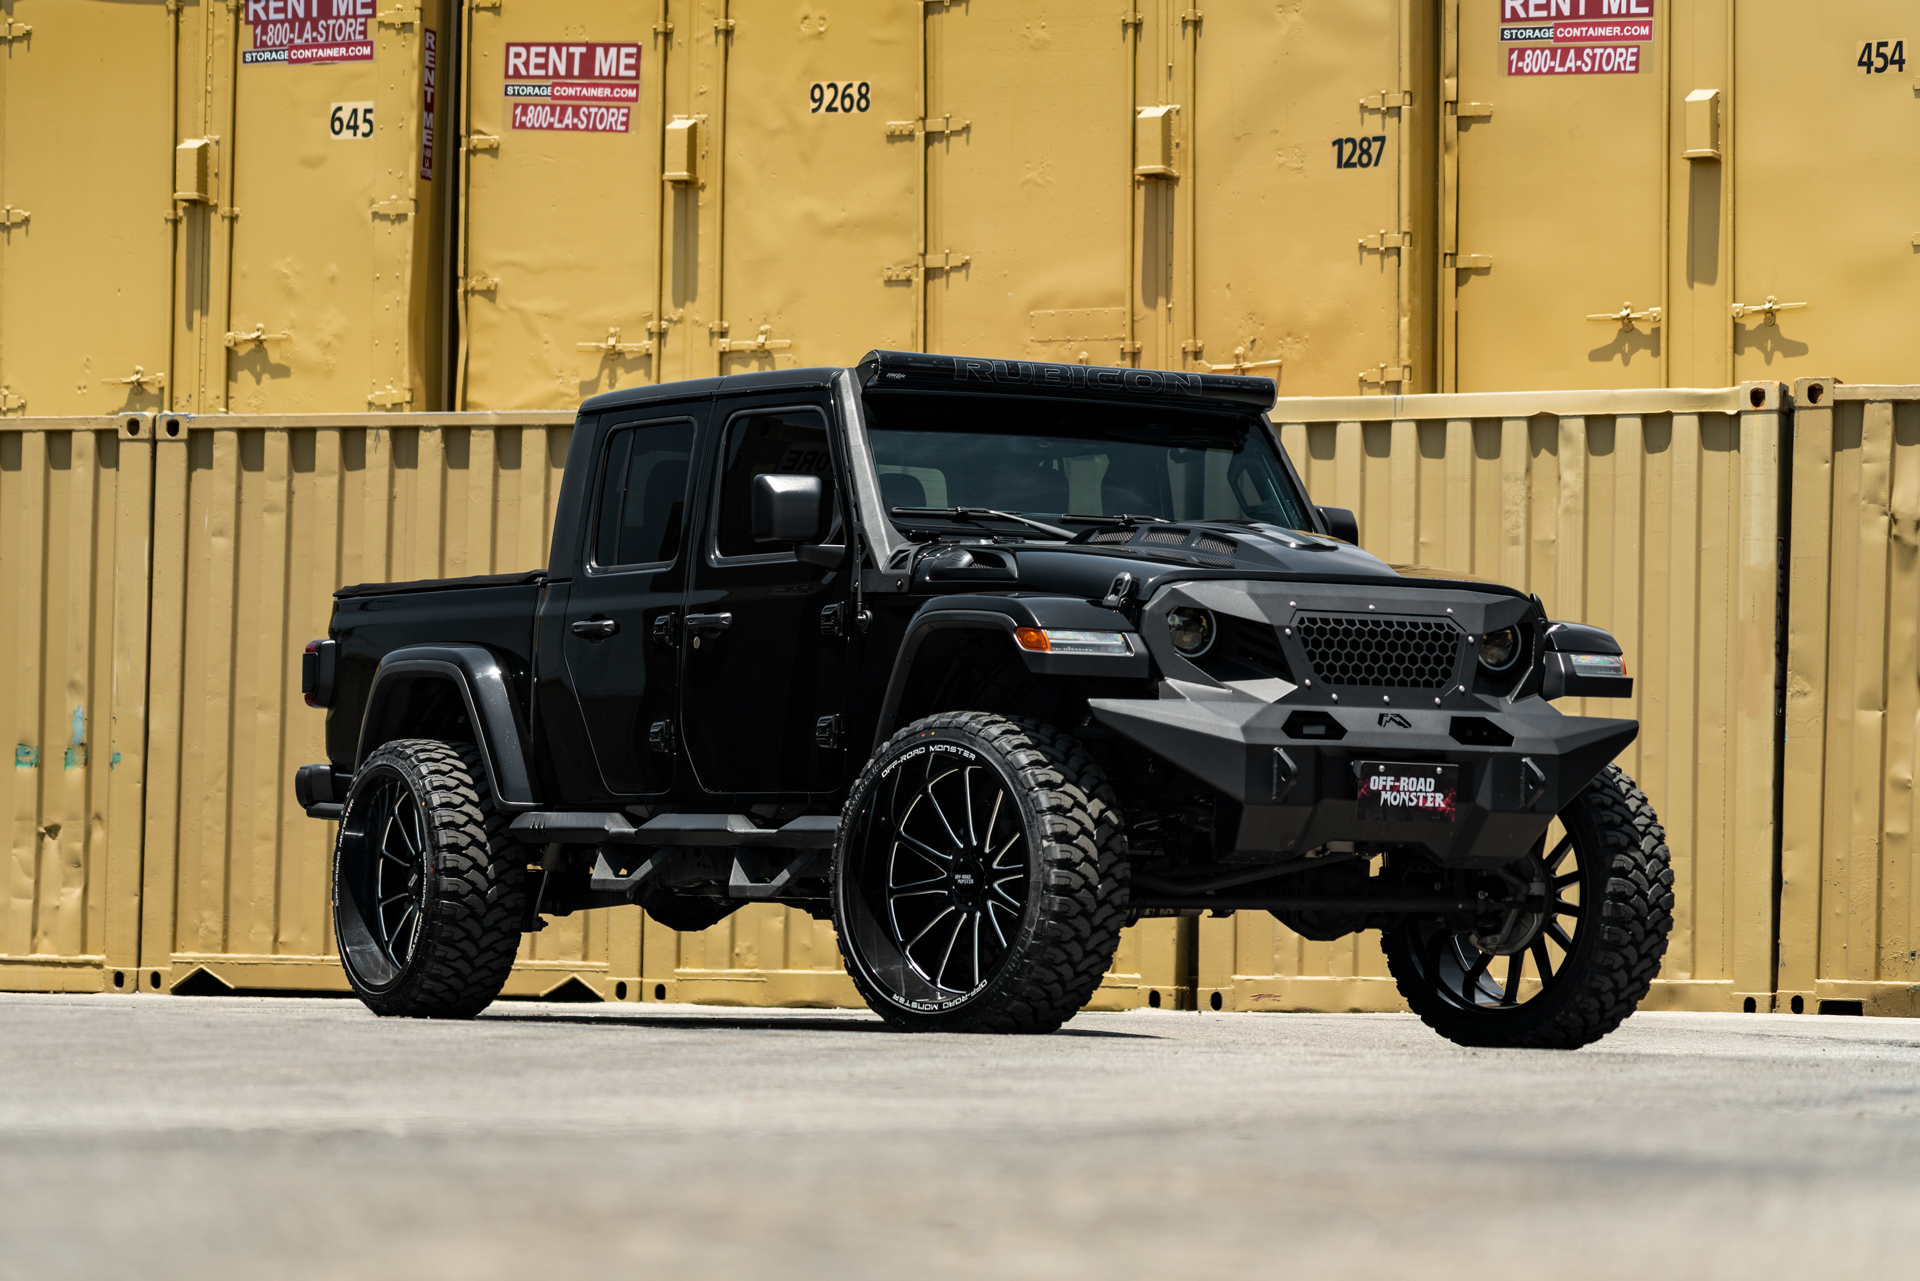 OffRoad Monsterm26 26x12 Wheels on a Jeep Gladiator